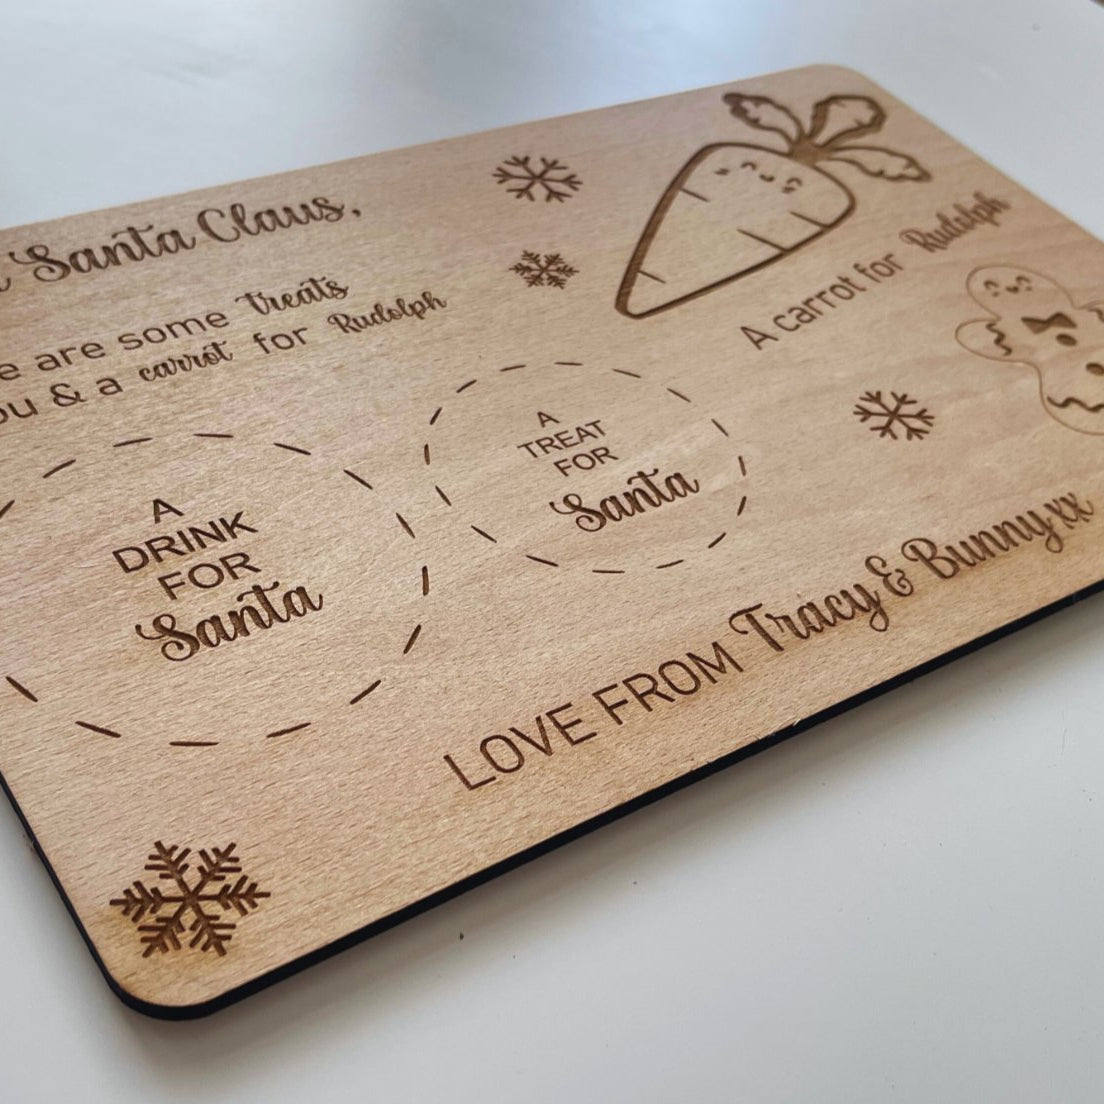 Make Christmas Eve extra special with our Personalised Santa Plate. Customisable for up to three names, complete with dedicated sections for Santa's treats, drink, and Rudolf's carrot, embellished with delightful gingerbread and snowflake engravings. Crafted from 4mm beech veneer, sized at 290mm x 185mm.